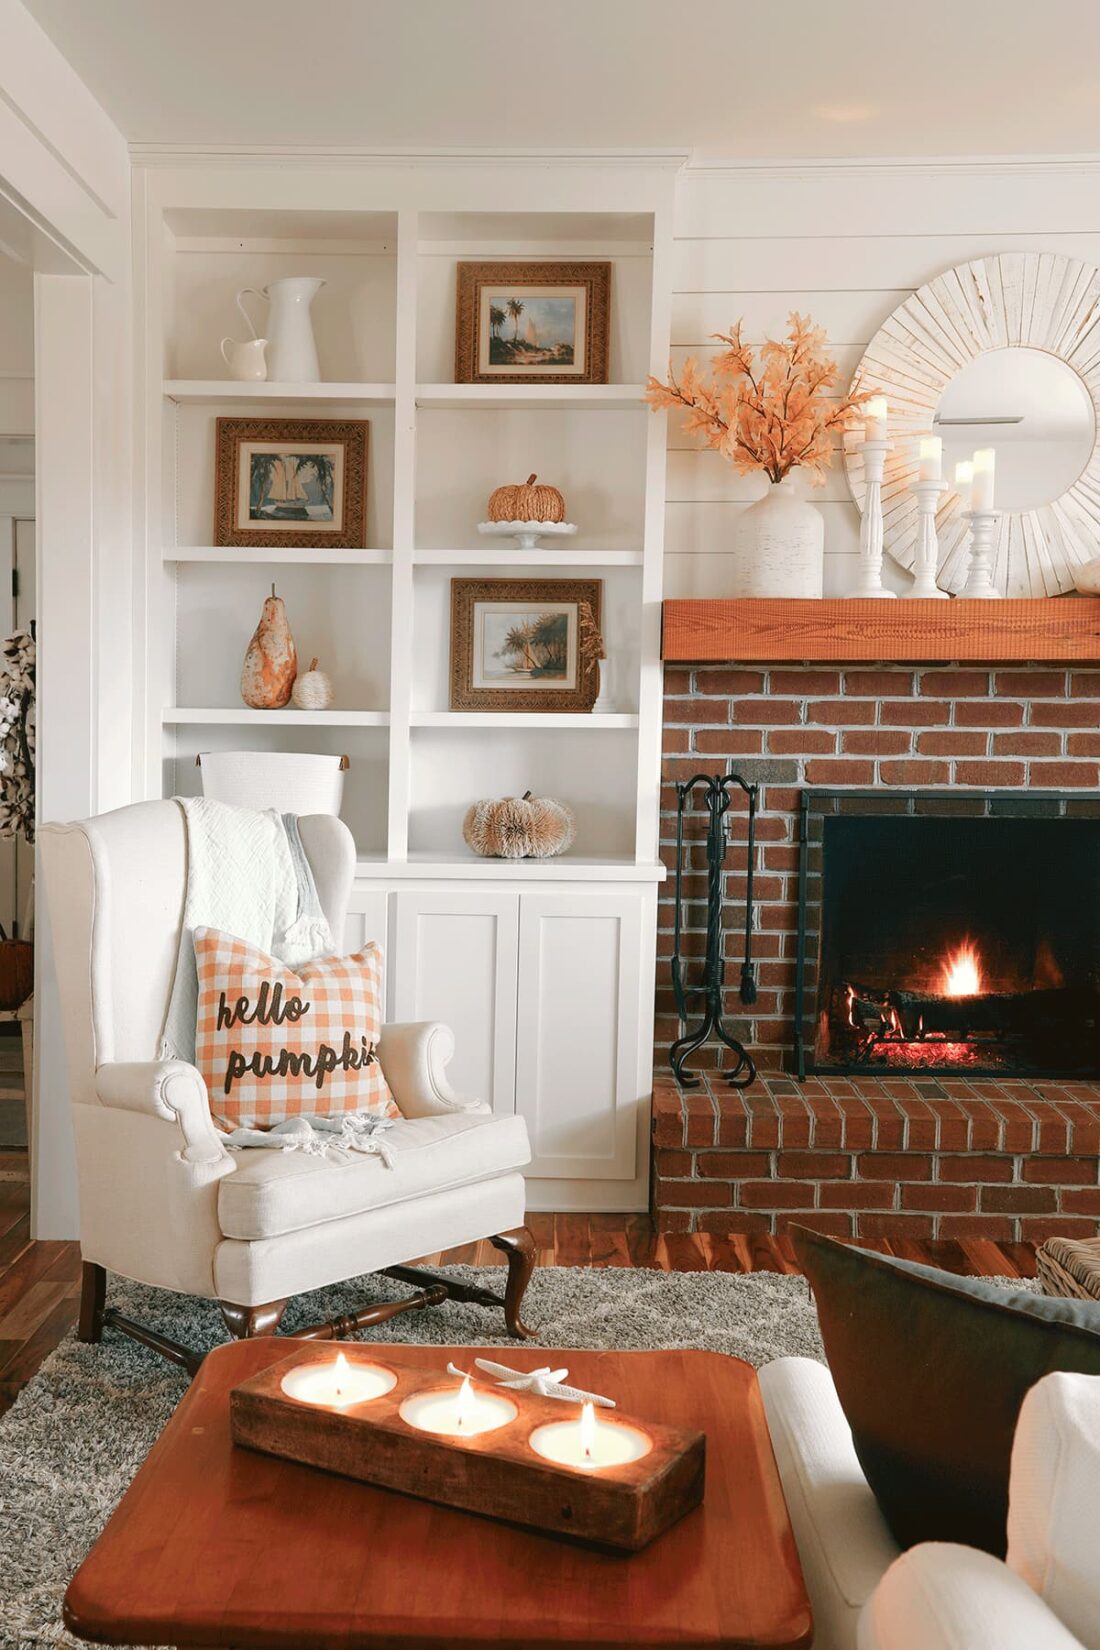 Close up picture of bookshelves, fireplace, and chair decorated for fall.
